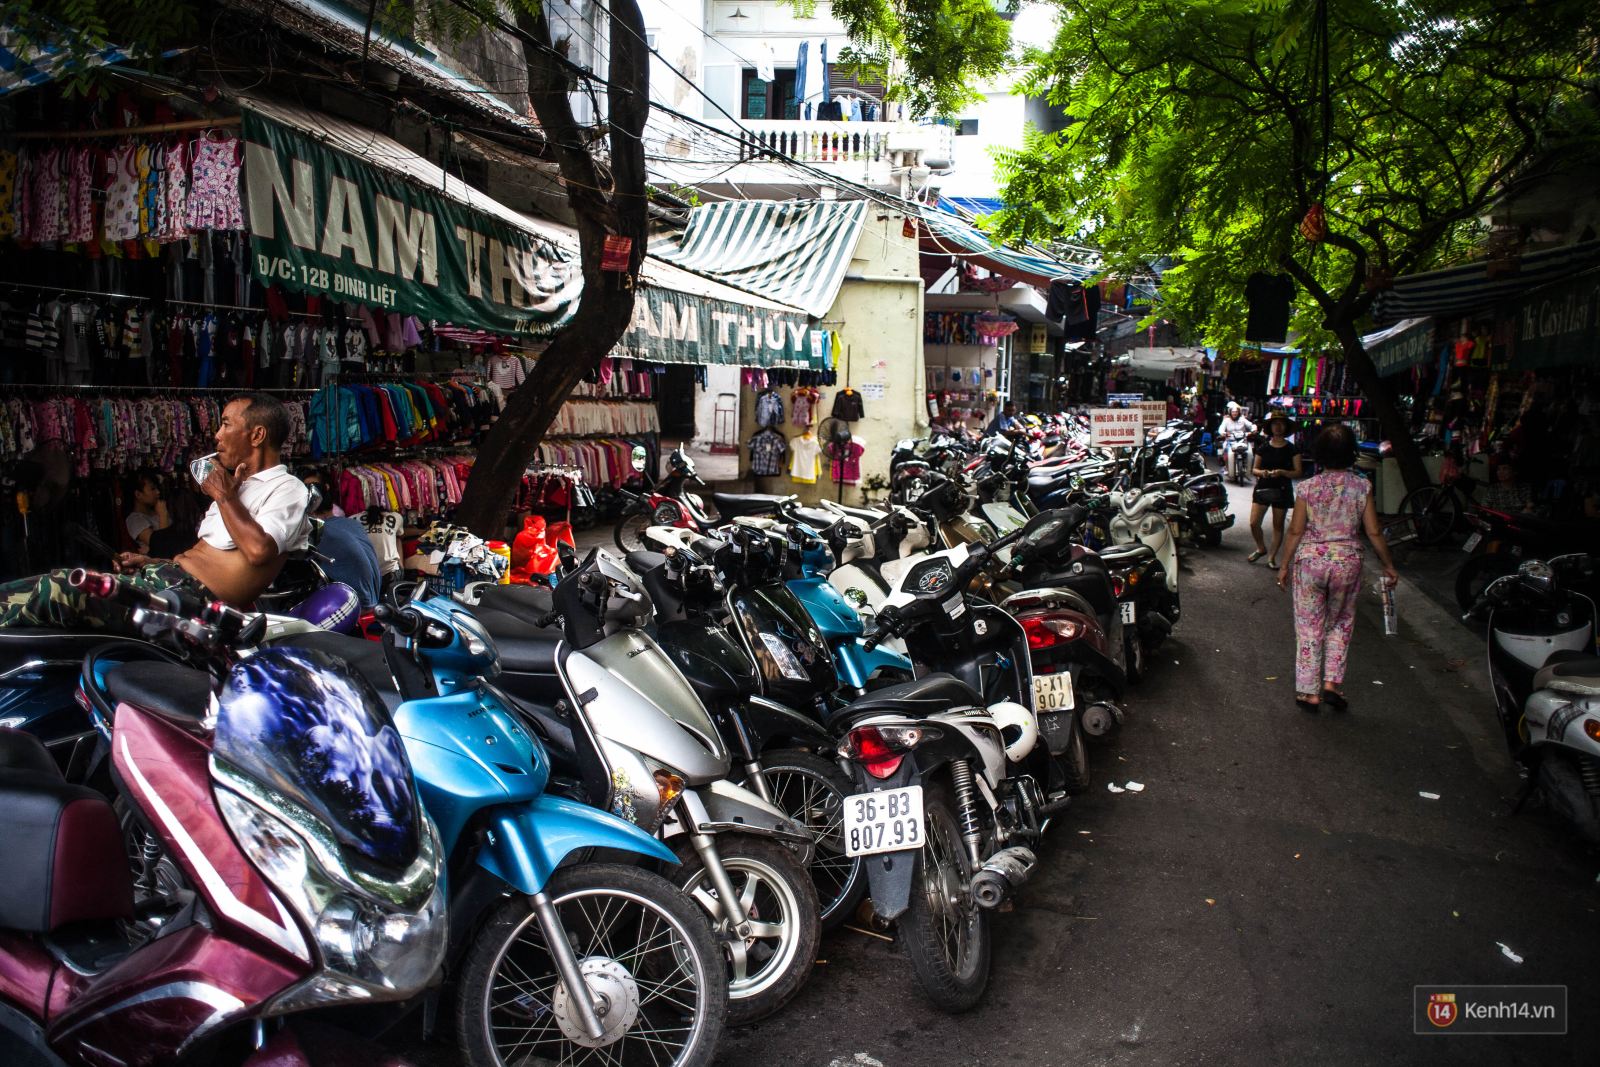 Hanoi offers incentive for home-based parking services